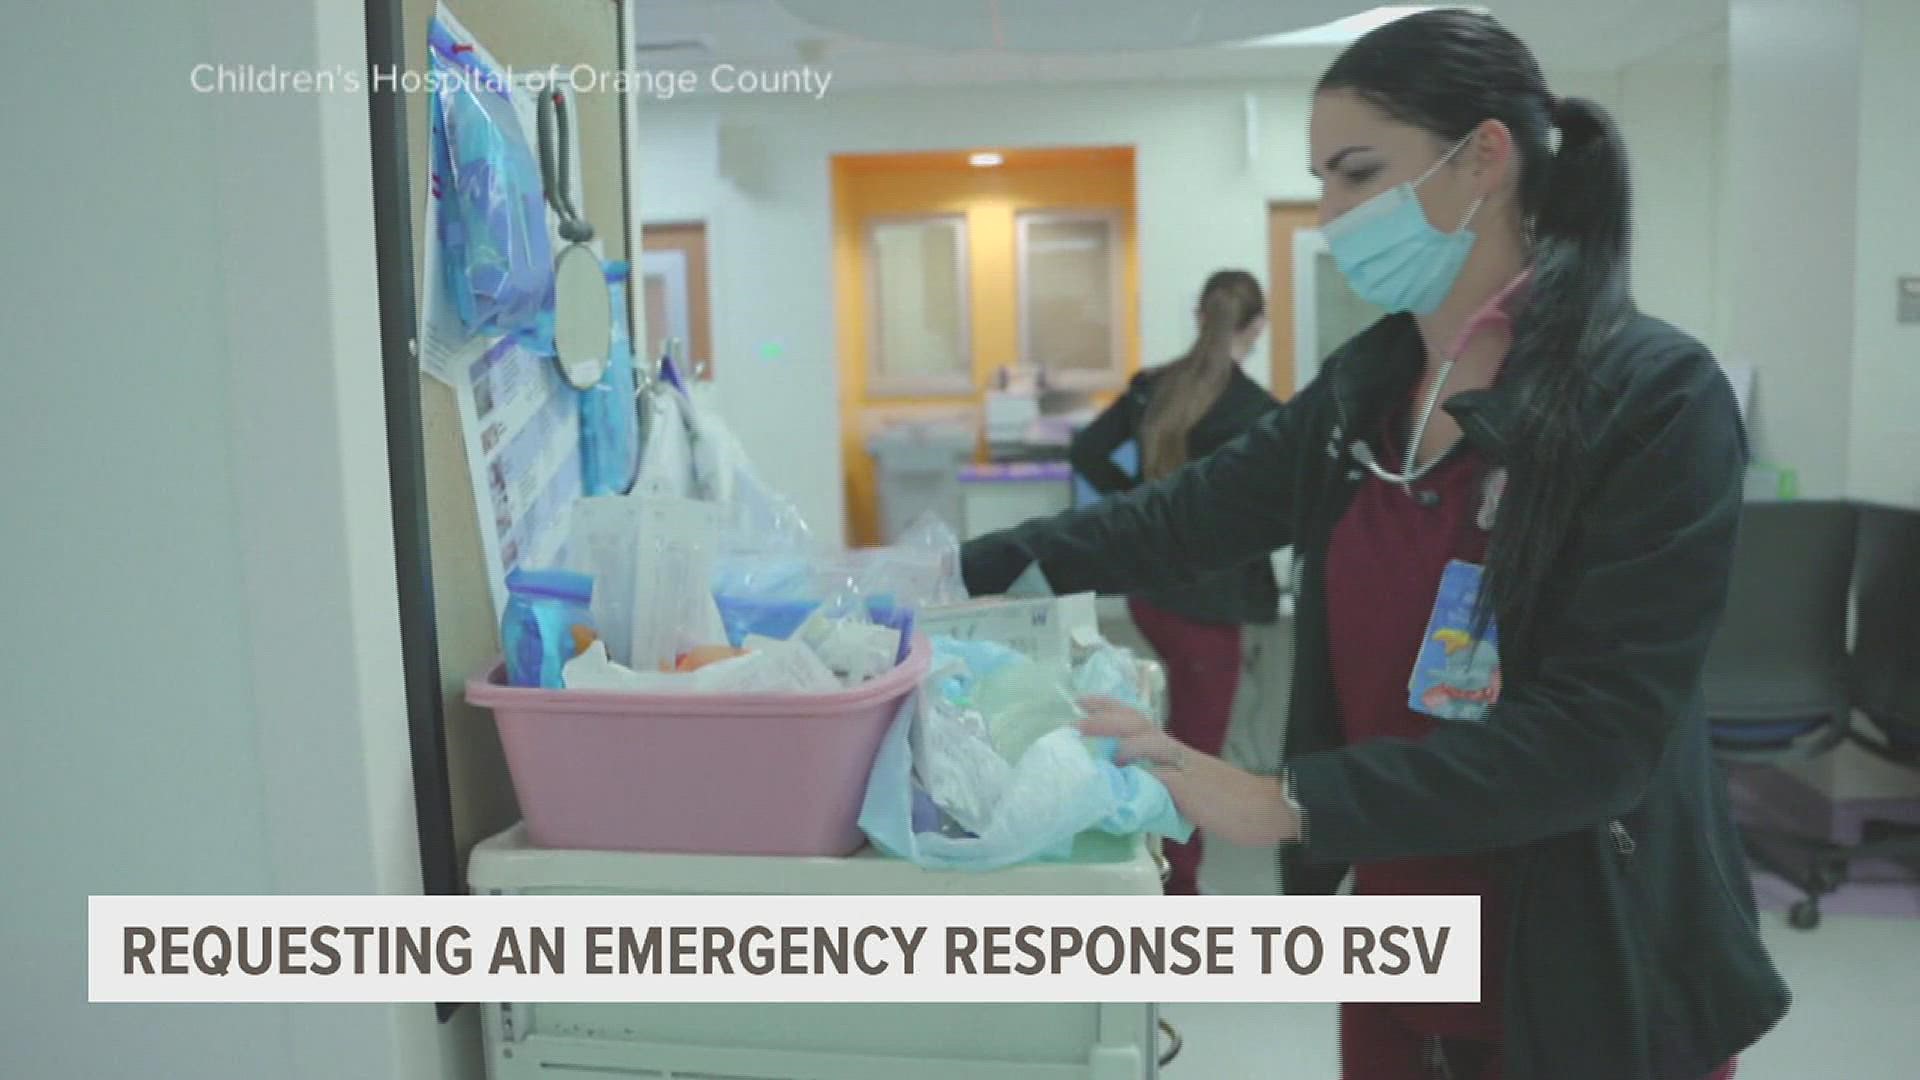 Experts say RSV is encountering a highly vulnerable population of babies and children who were sheltered from common bugs during the pandemic lockdown.